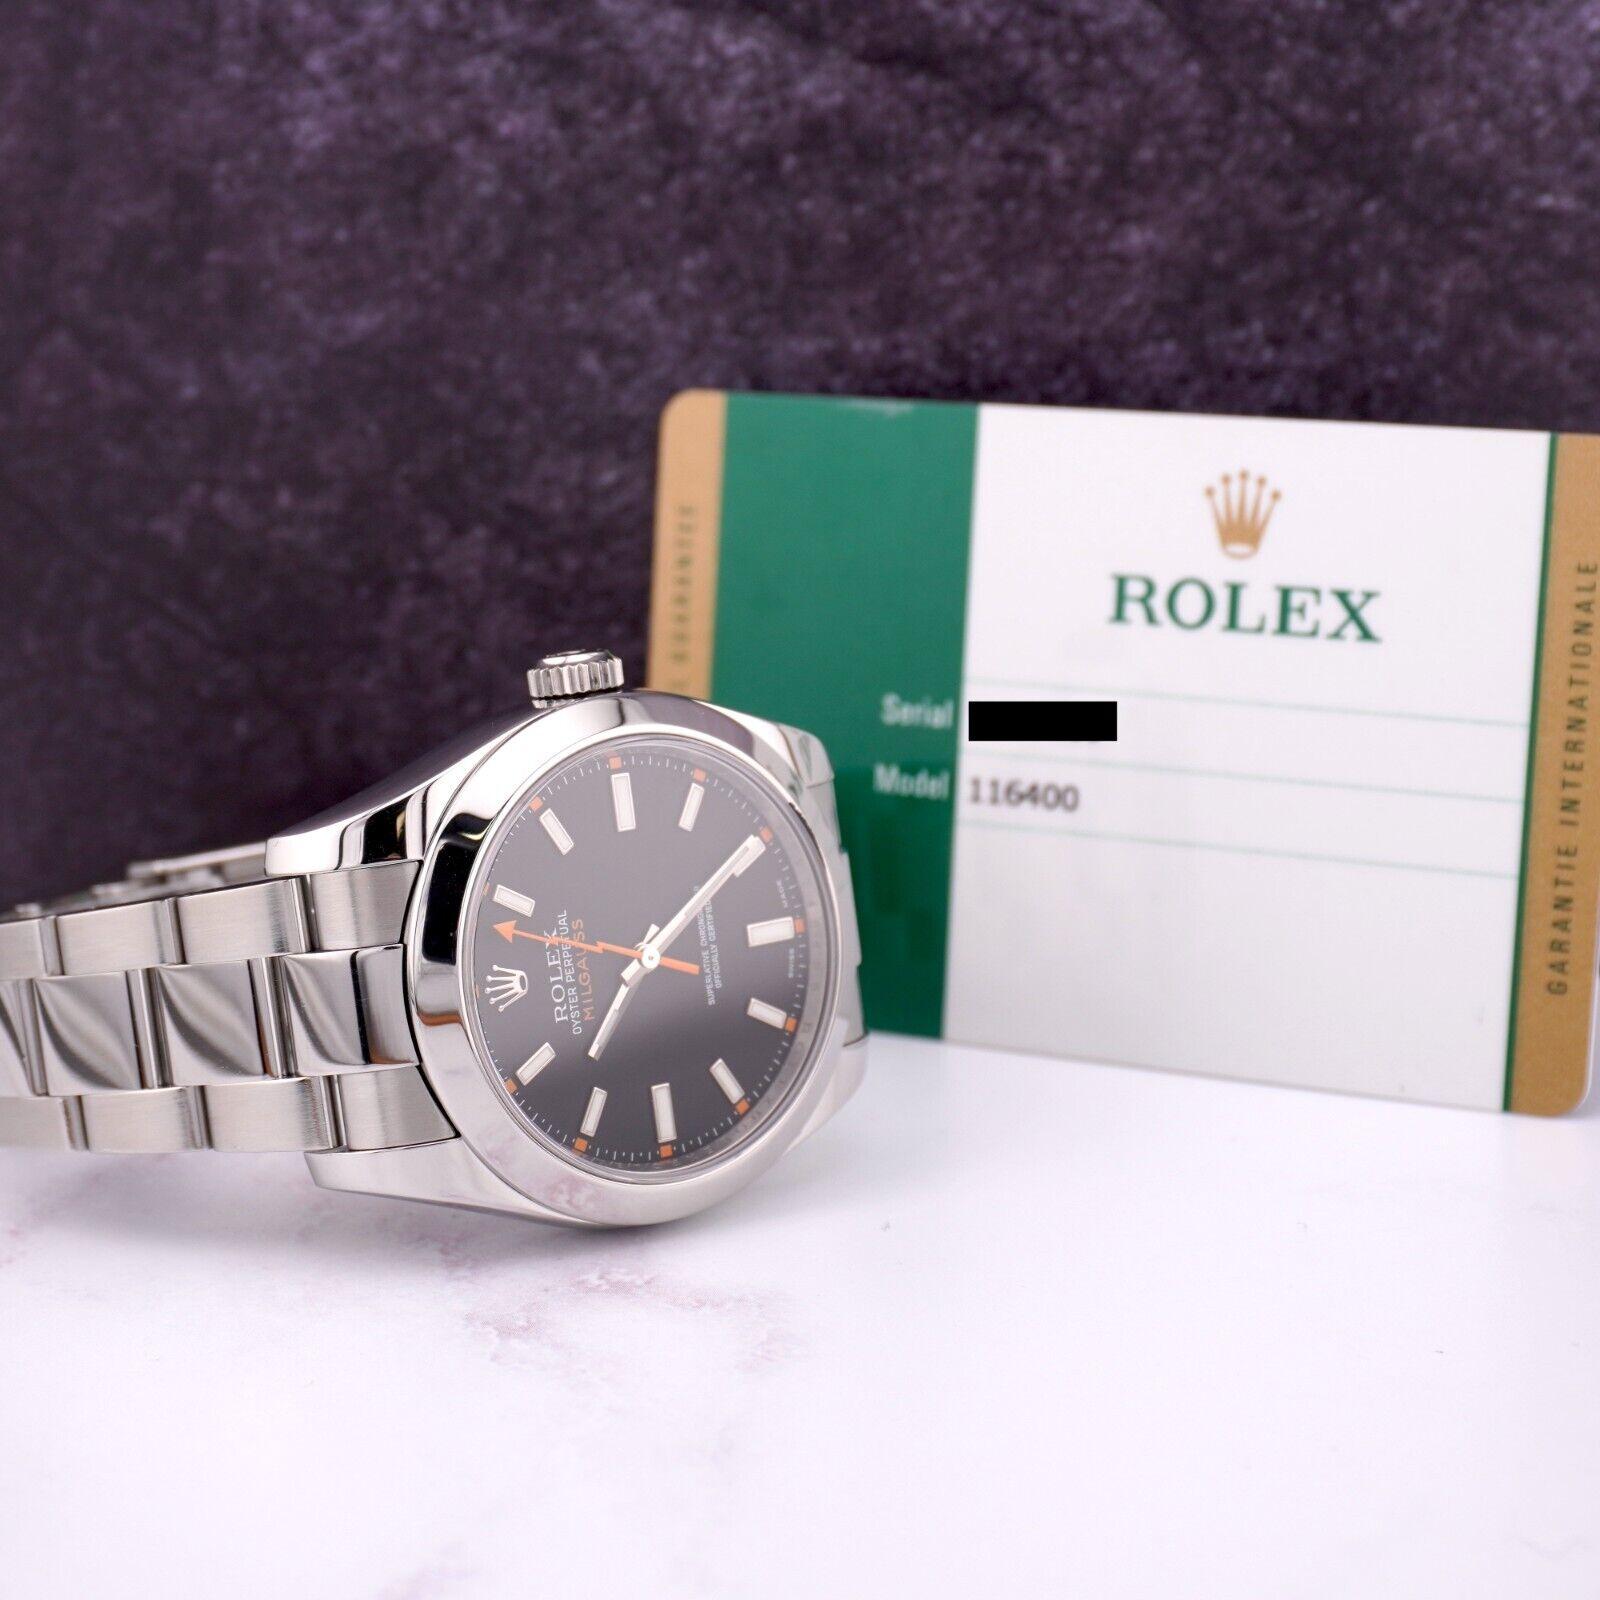 Rolex 40mm Milgauss Men's Black Dial Steel Thunderbolt Watch BOX & PAPERS 116400 For Sale 1